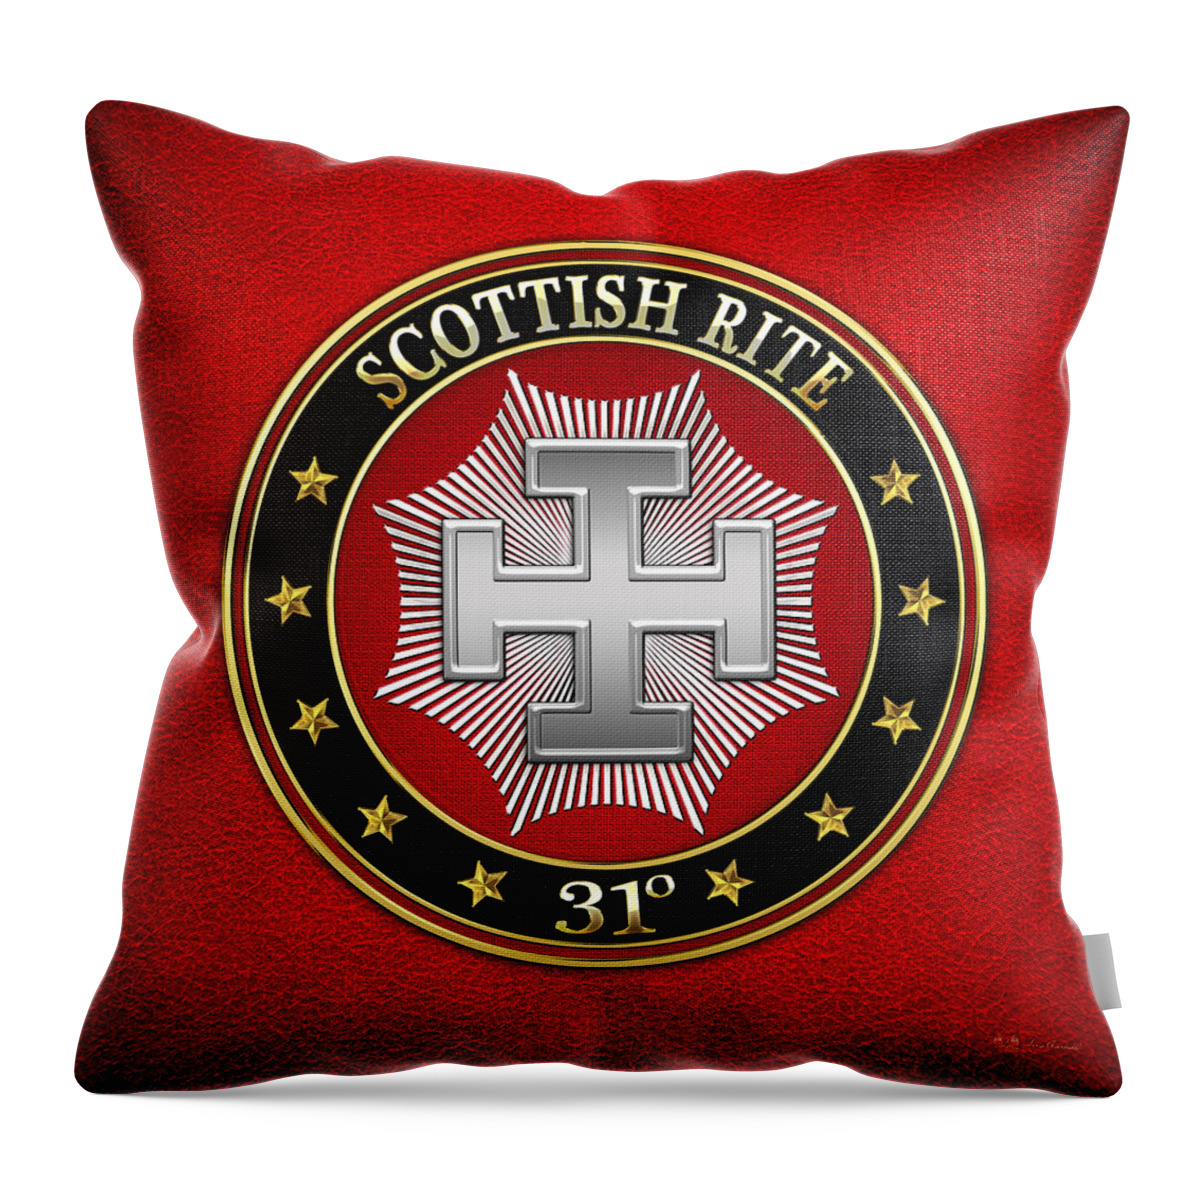 'scottish Rite' Collection By Serge Averbukh Throw Pillow featuring the digital art 31st Degree - Inspector Inquisitor Jewel on Red Leather by Serge Averbukh